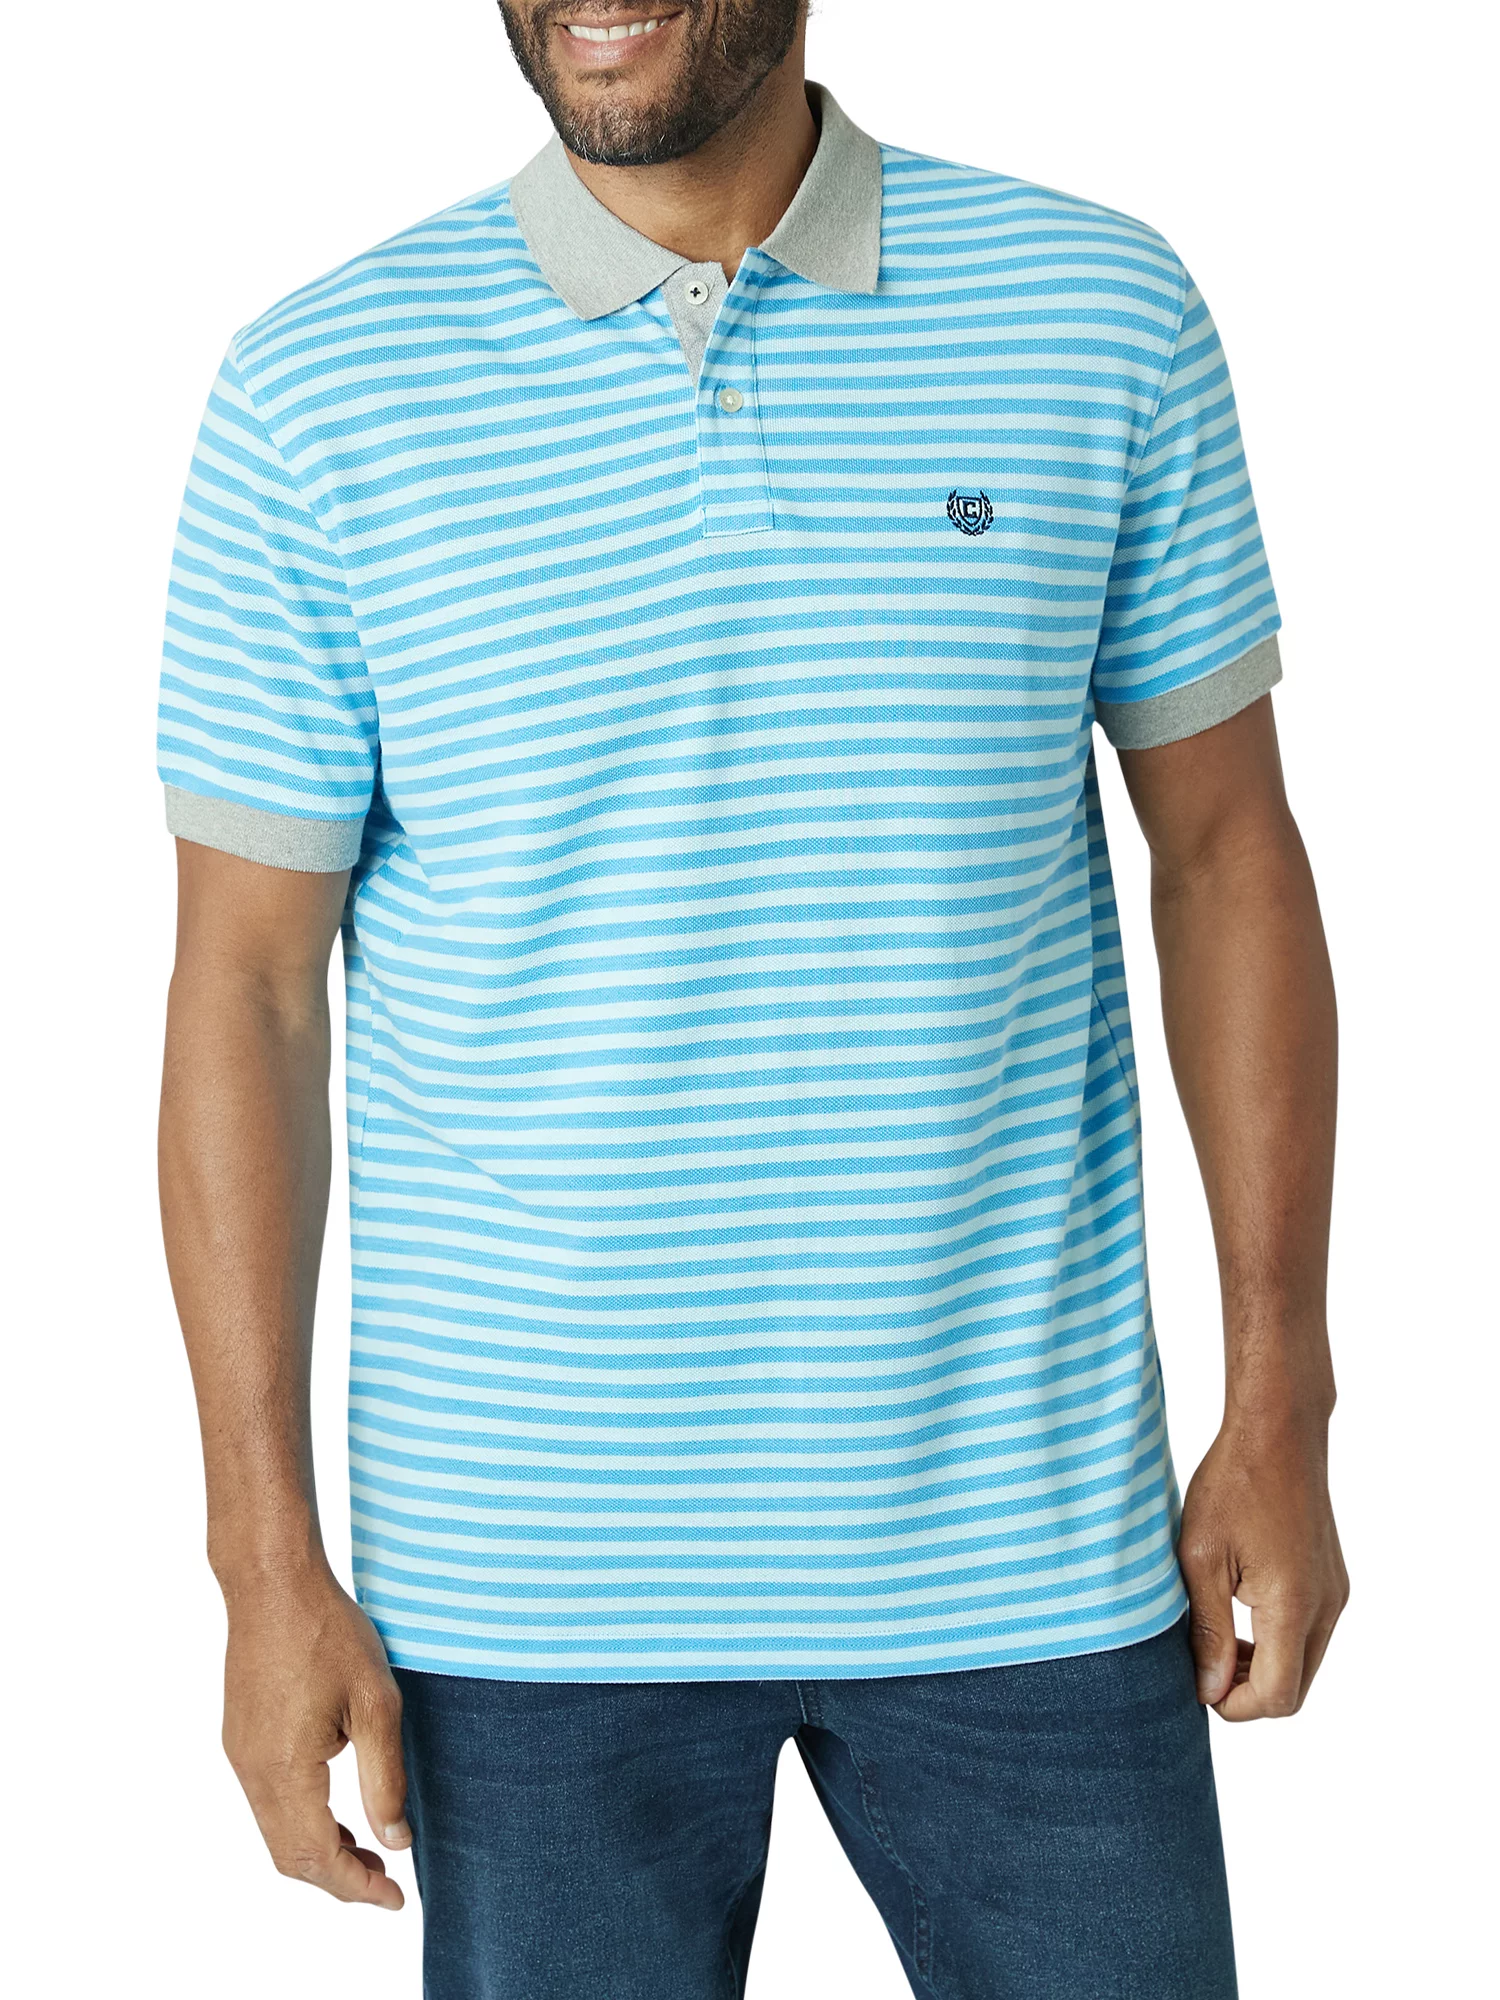 Wholesale Polo Shirt Supplier In Spain